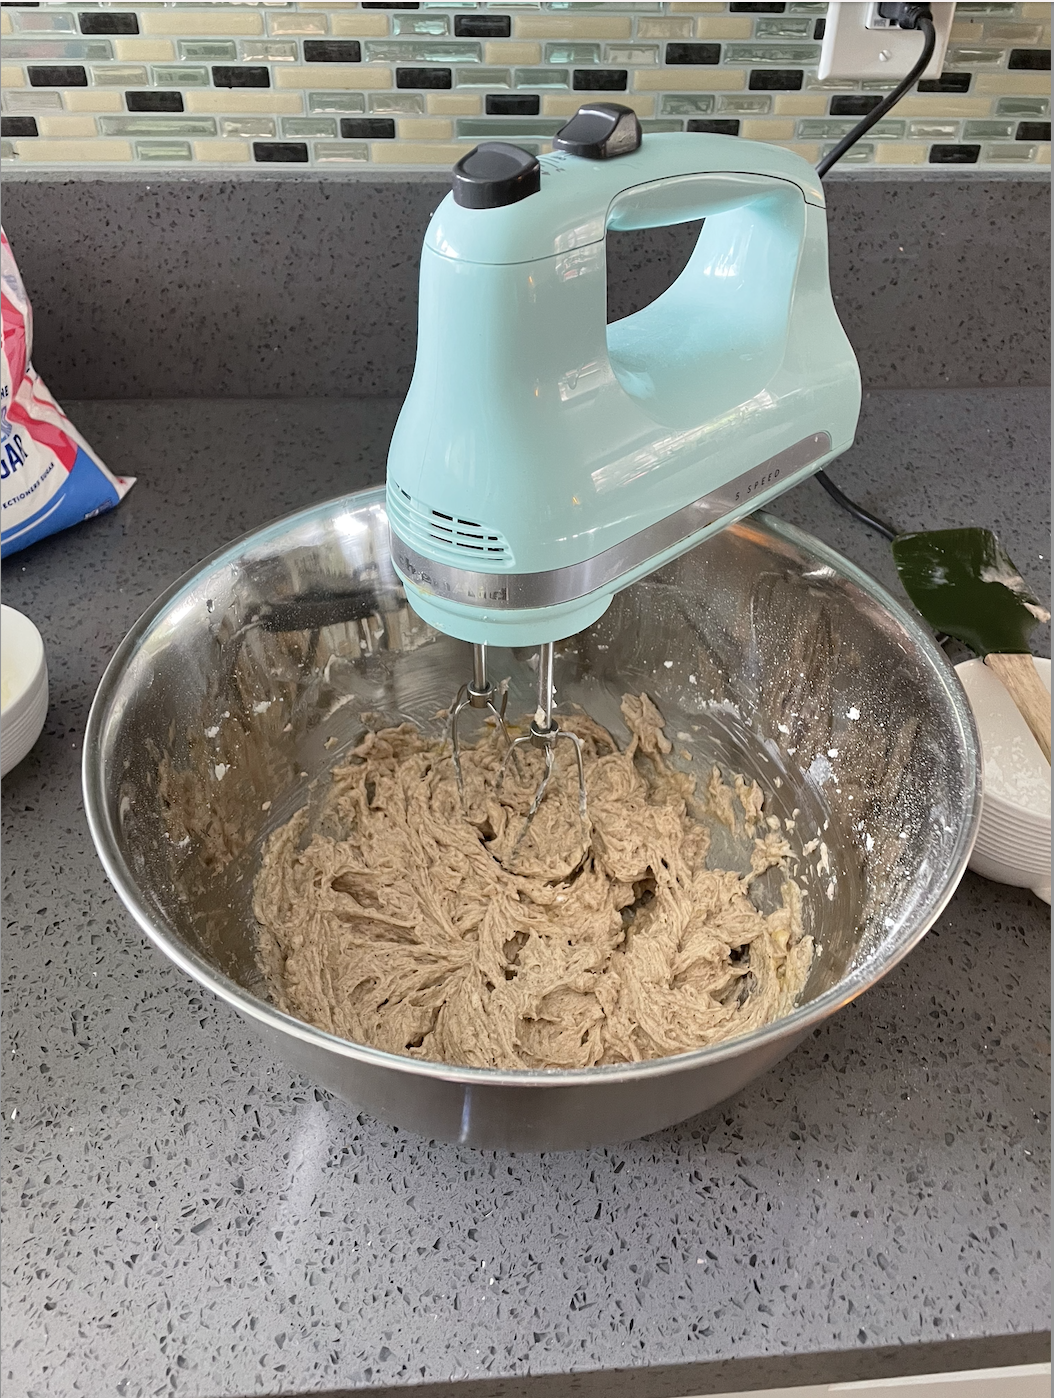 a hand-mixer in a bowl of cookie batter